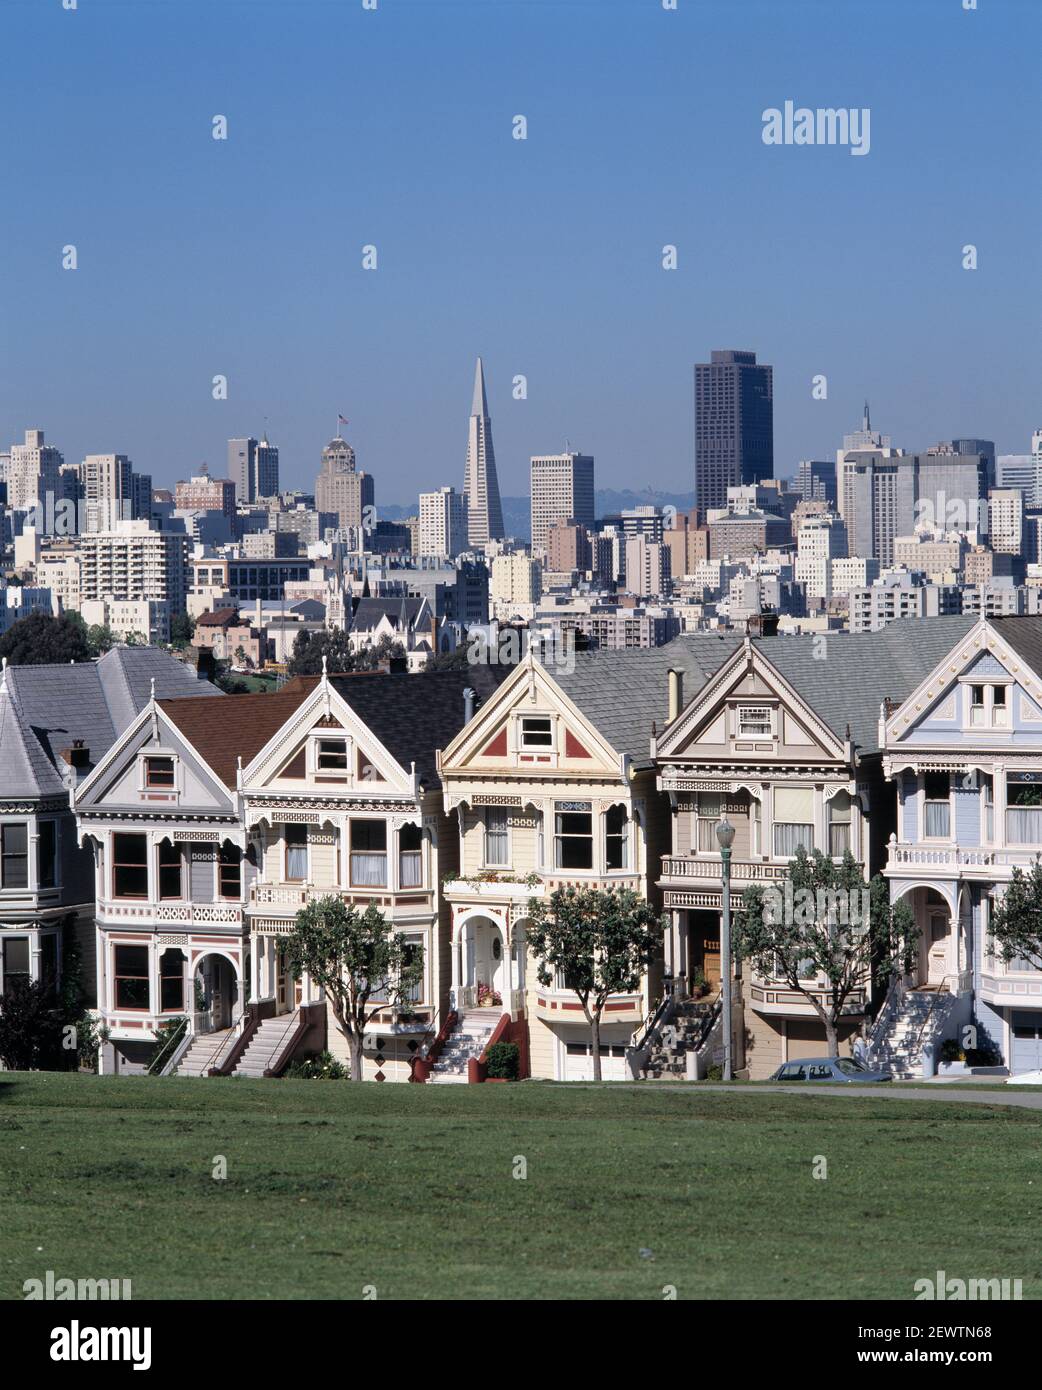 USA. California. San Francisco. City skyline from Steiner street with the 'painted ladies' houses. Stock Photo